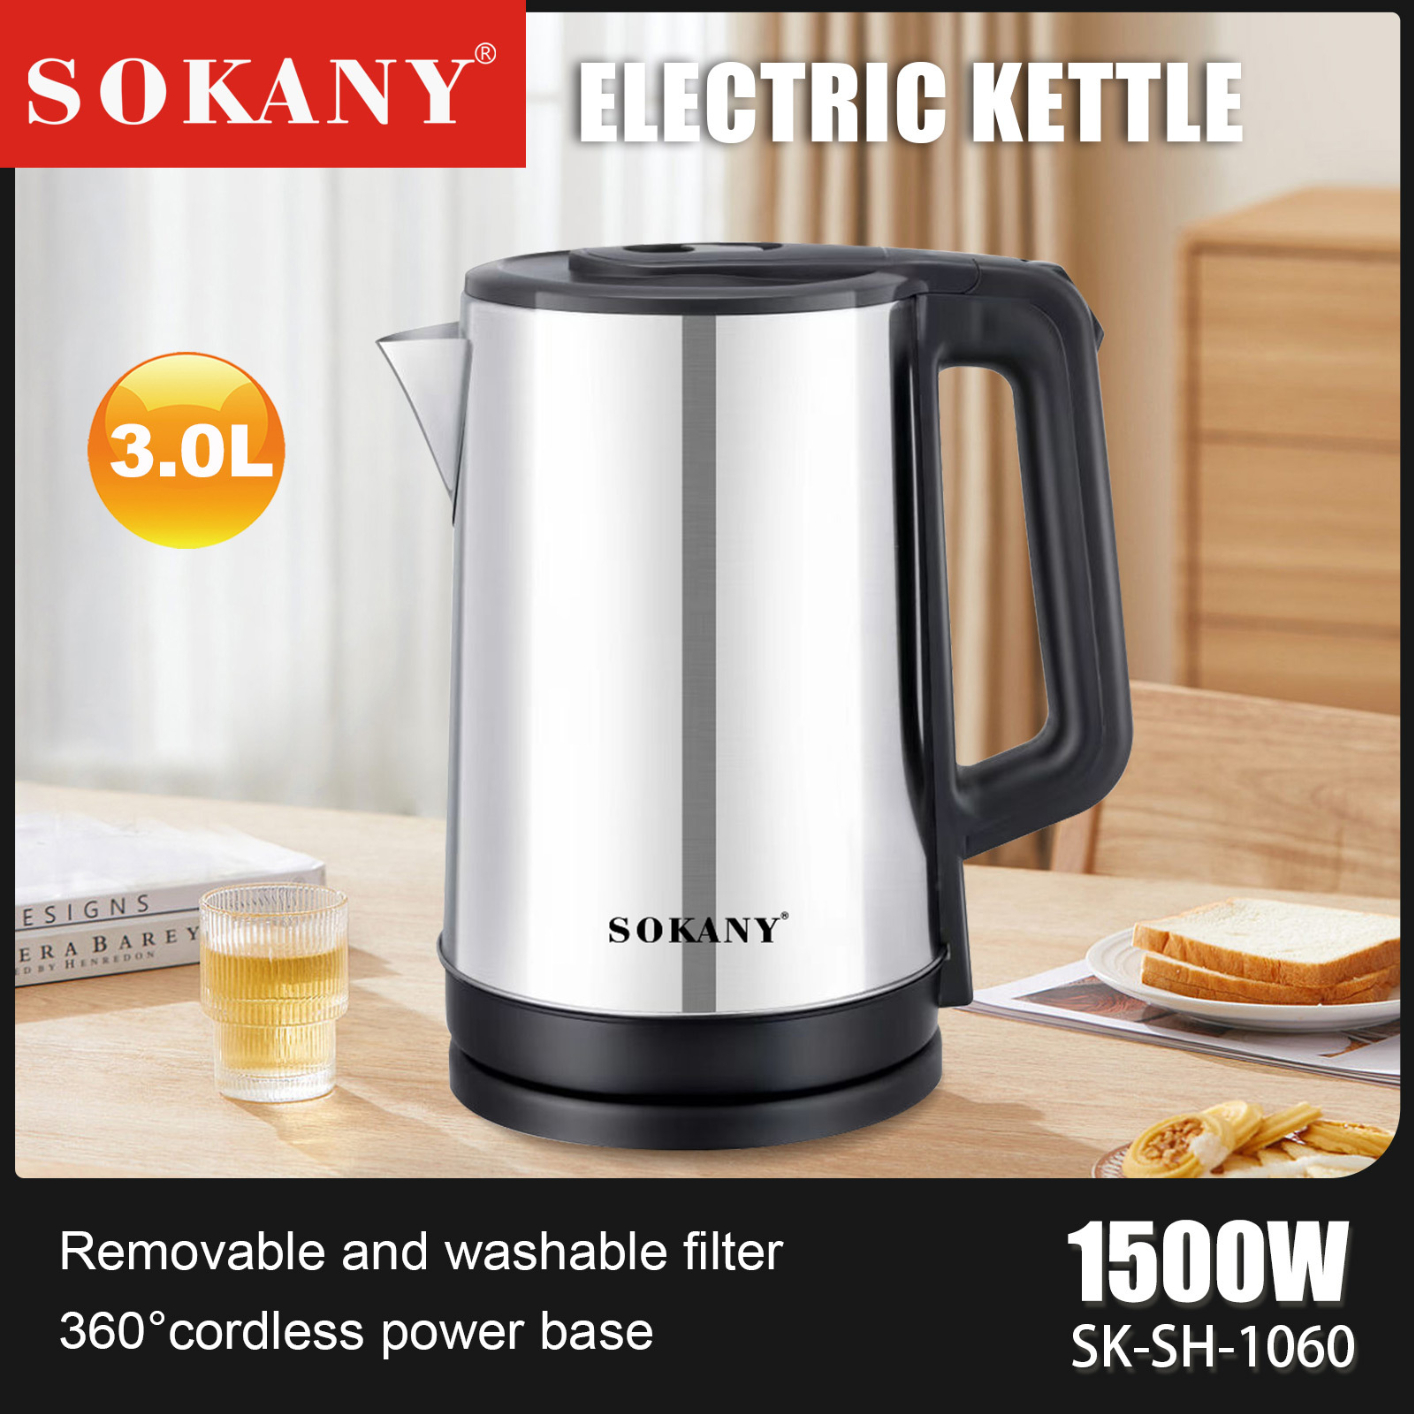 SOKANY 1060 Electric Kettle Stainless Steel with Double Wall, Wide-Open Lid 3L Electric Tea Kettle, BPA Free Water Kettle & Hot Water Boiler for Boiling Water, Auto Shut-Off & Boil-Dry Protection